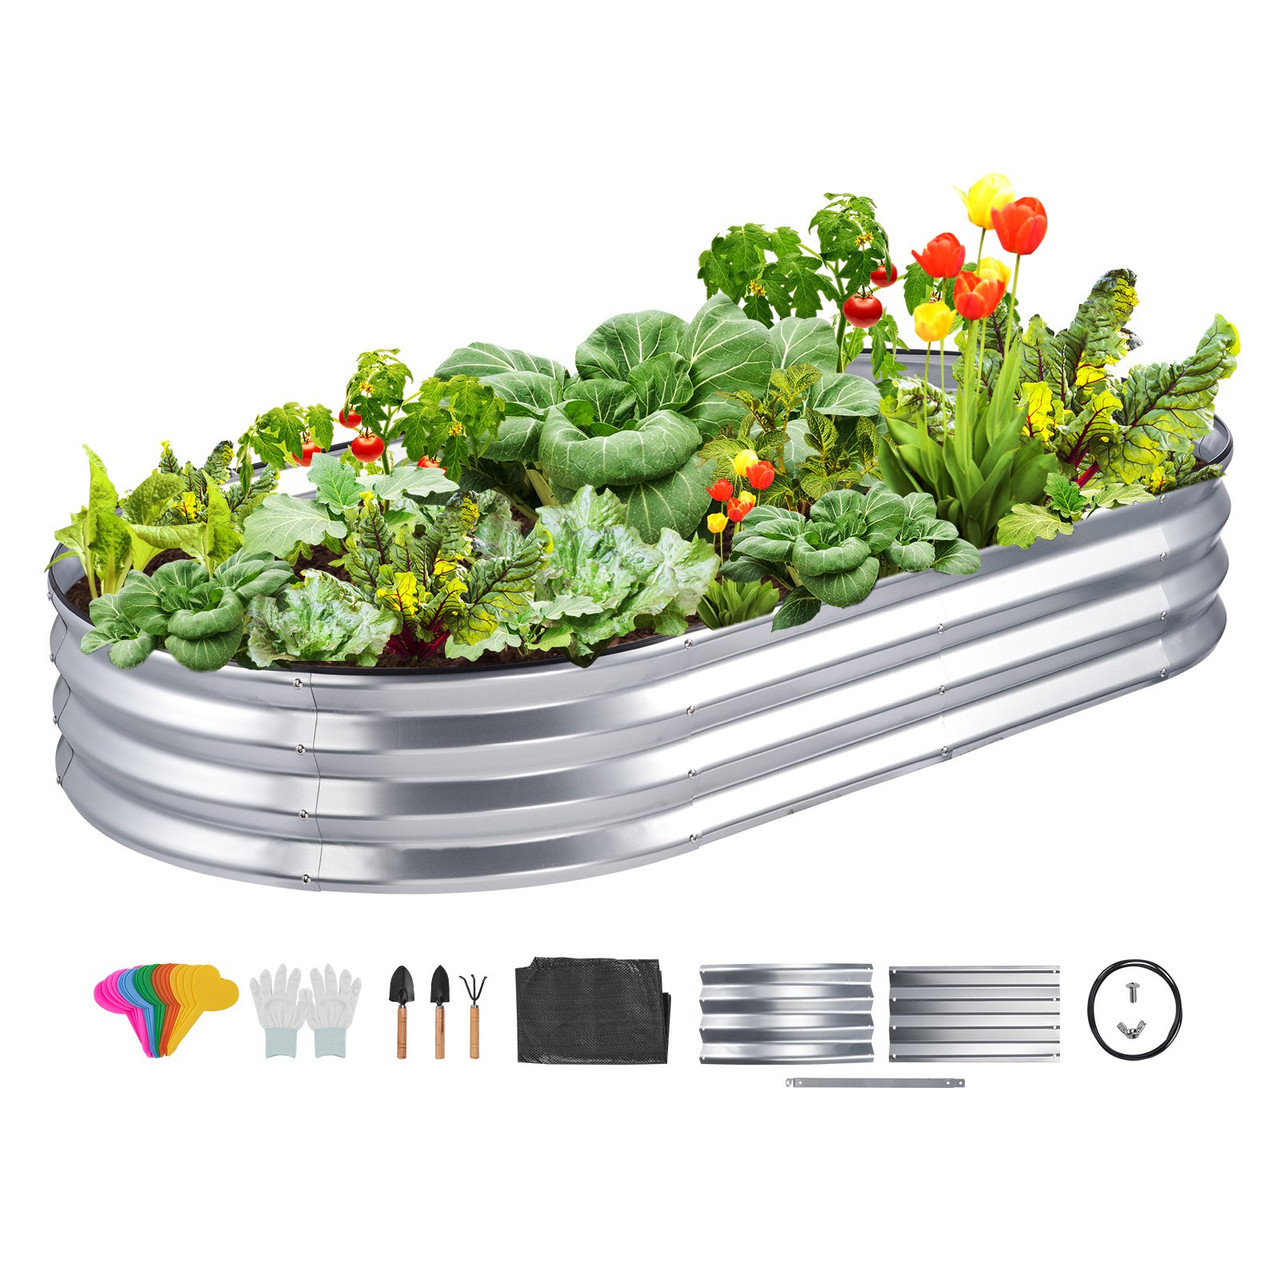 Raised Garden Bed, 70.9x35.4x11 inch Galvanized Metal Planter Box, Outdoor Planting Boxes with Open Base, for Growing Flowers/Vegetables/Herbs in Backyard/Garden/Patio/Balcony, Silver